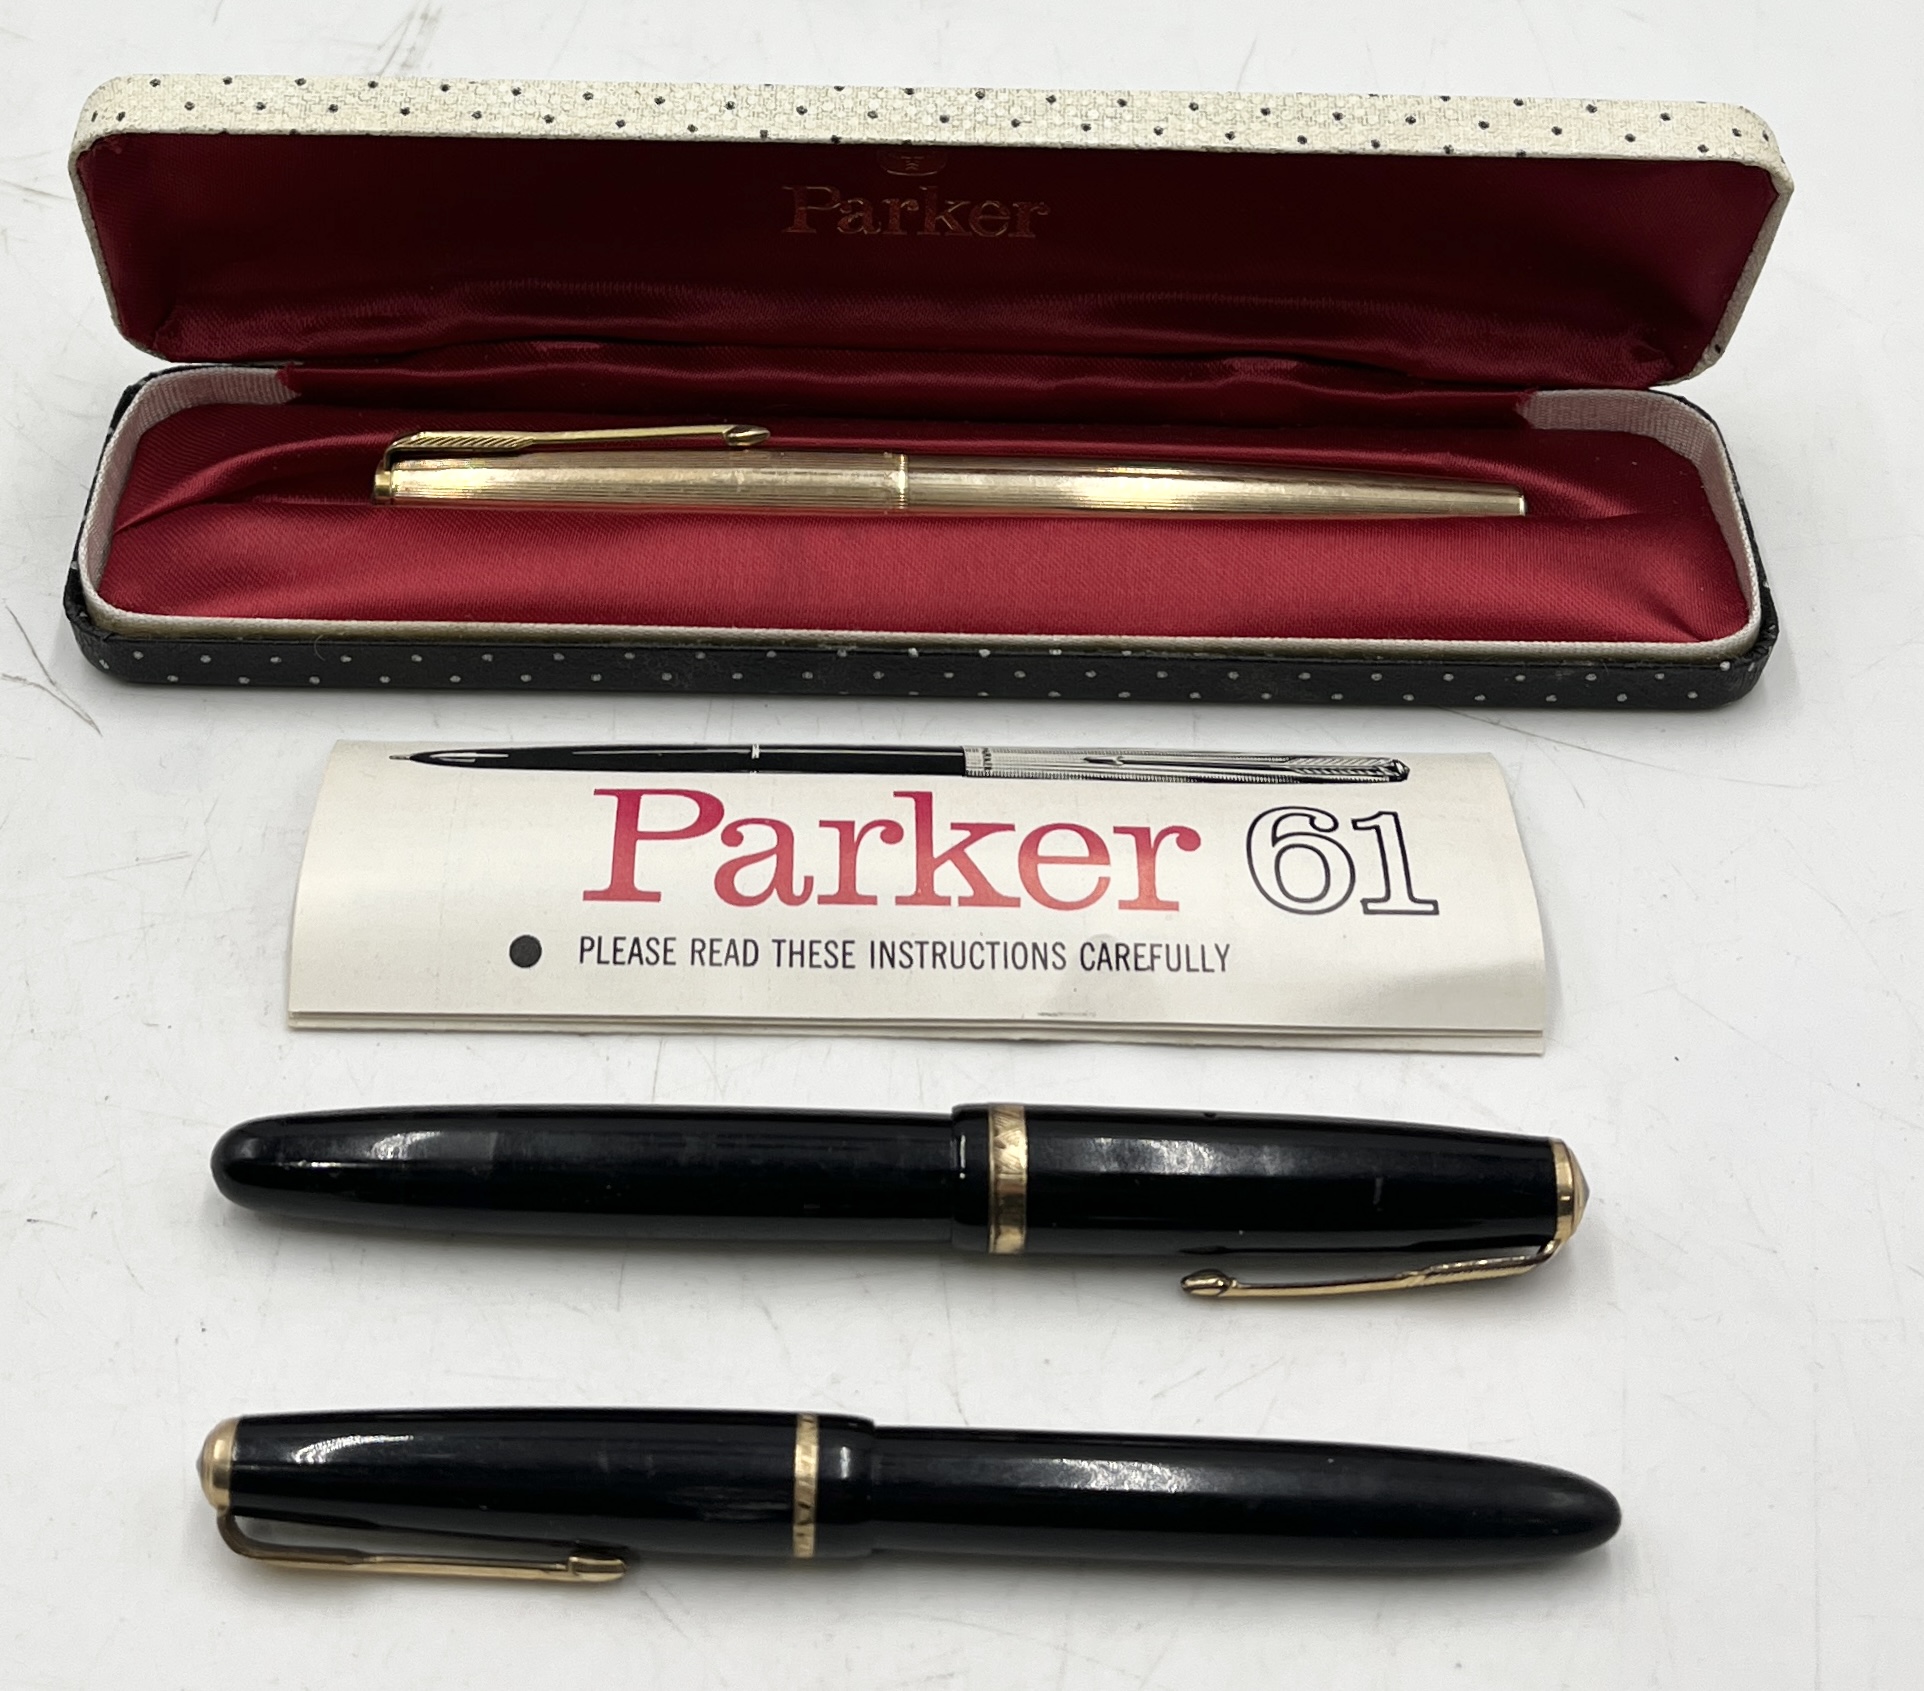 A cased Parker 61 gold plated fountain pen along with a Parker Duofold and a Parker Slimfold